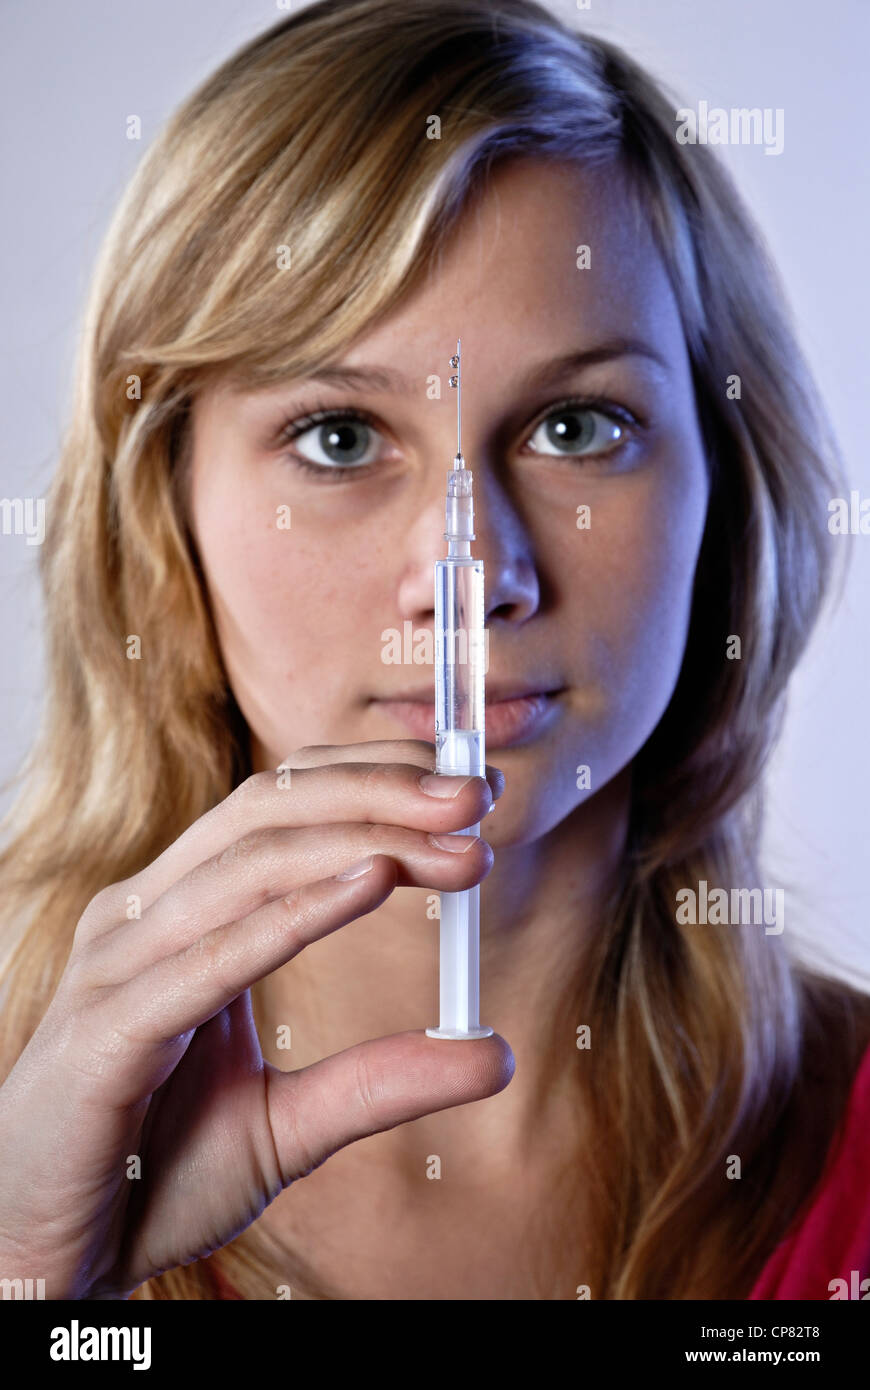 Young woman with syringe as a symbol for drug addiction. Stock Photo